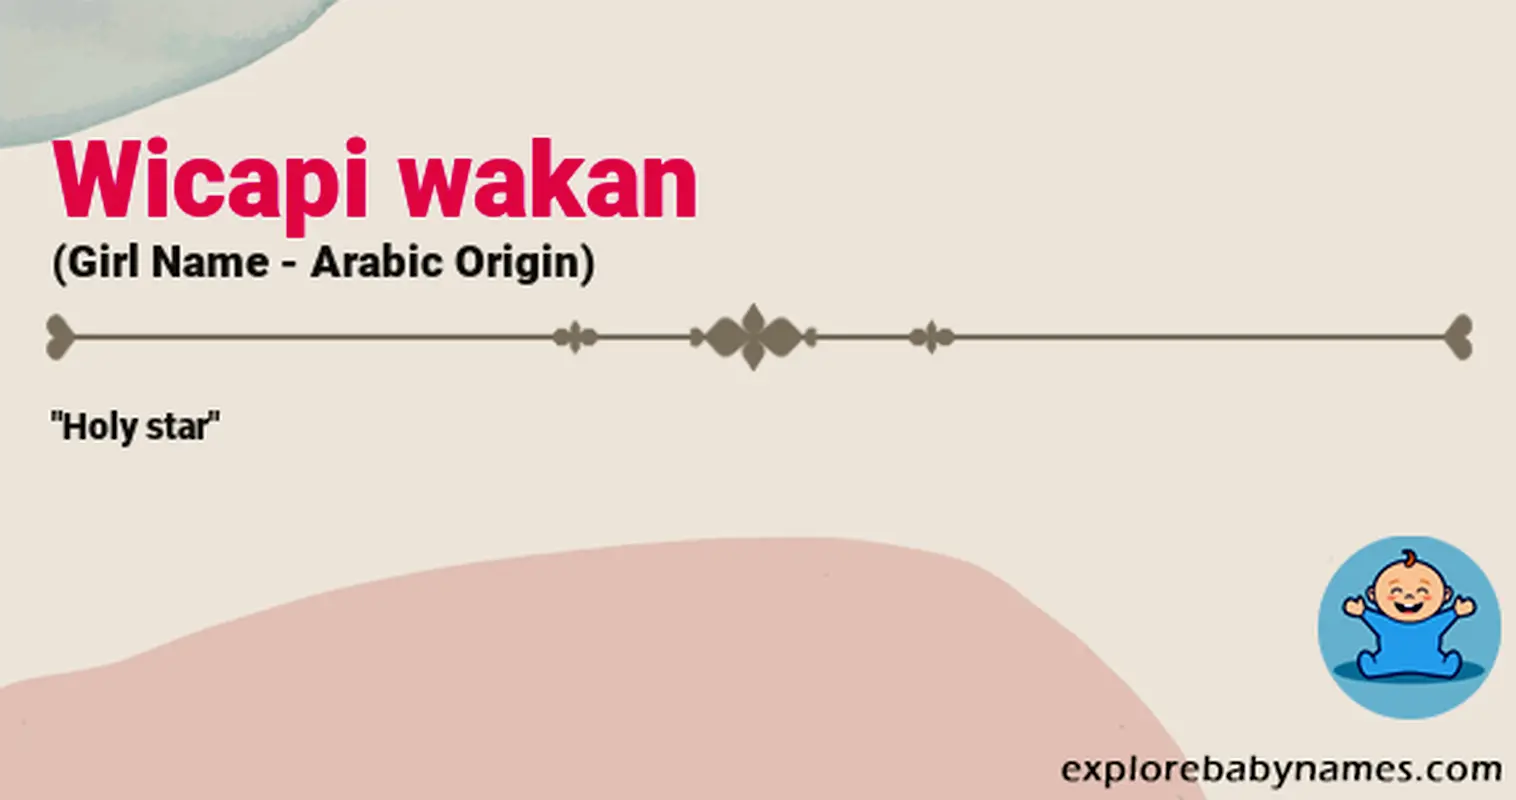 Meaning of Wicapi wakan